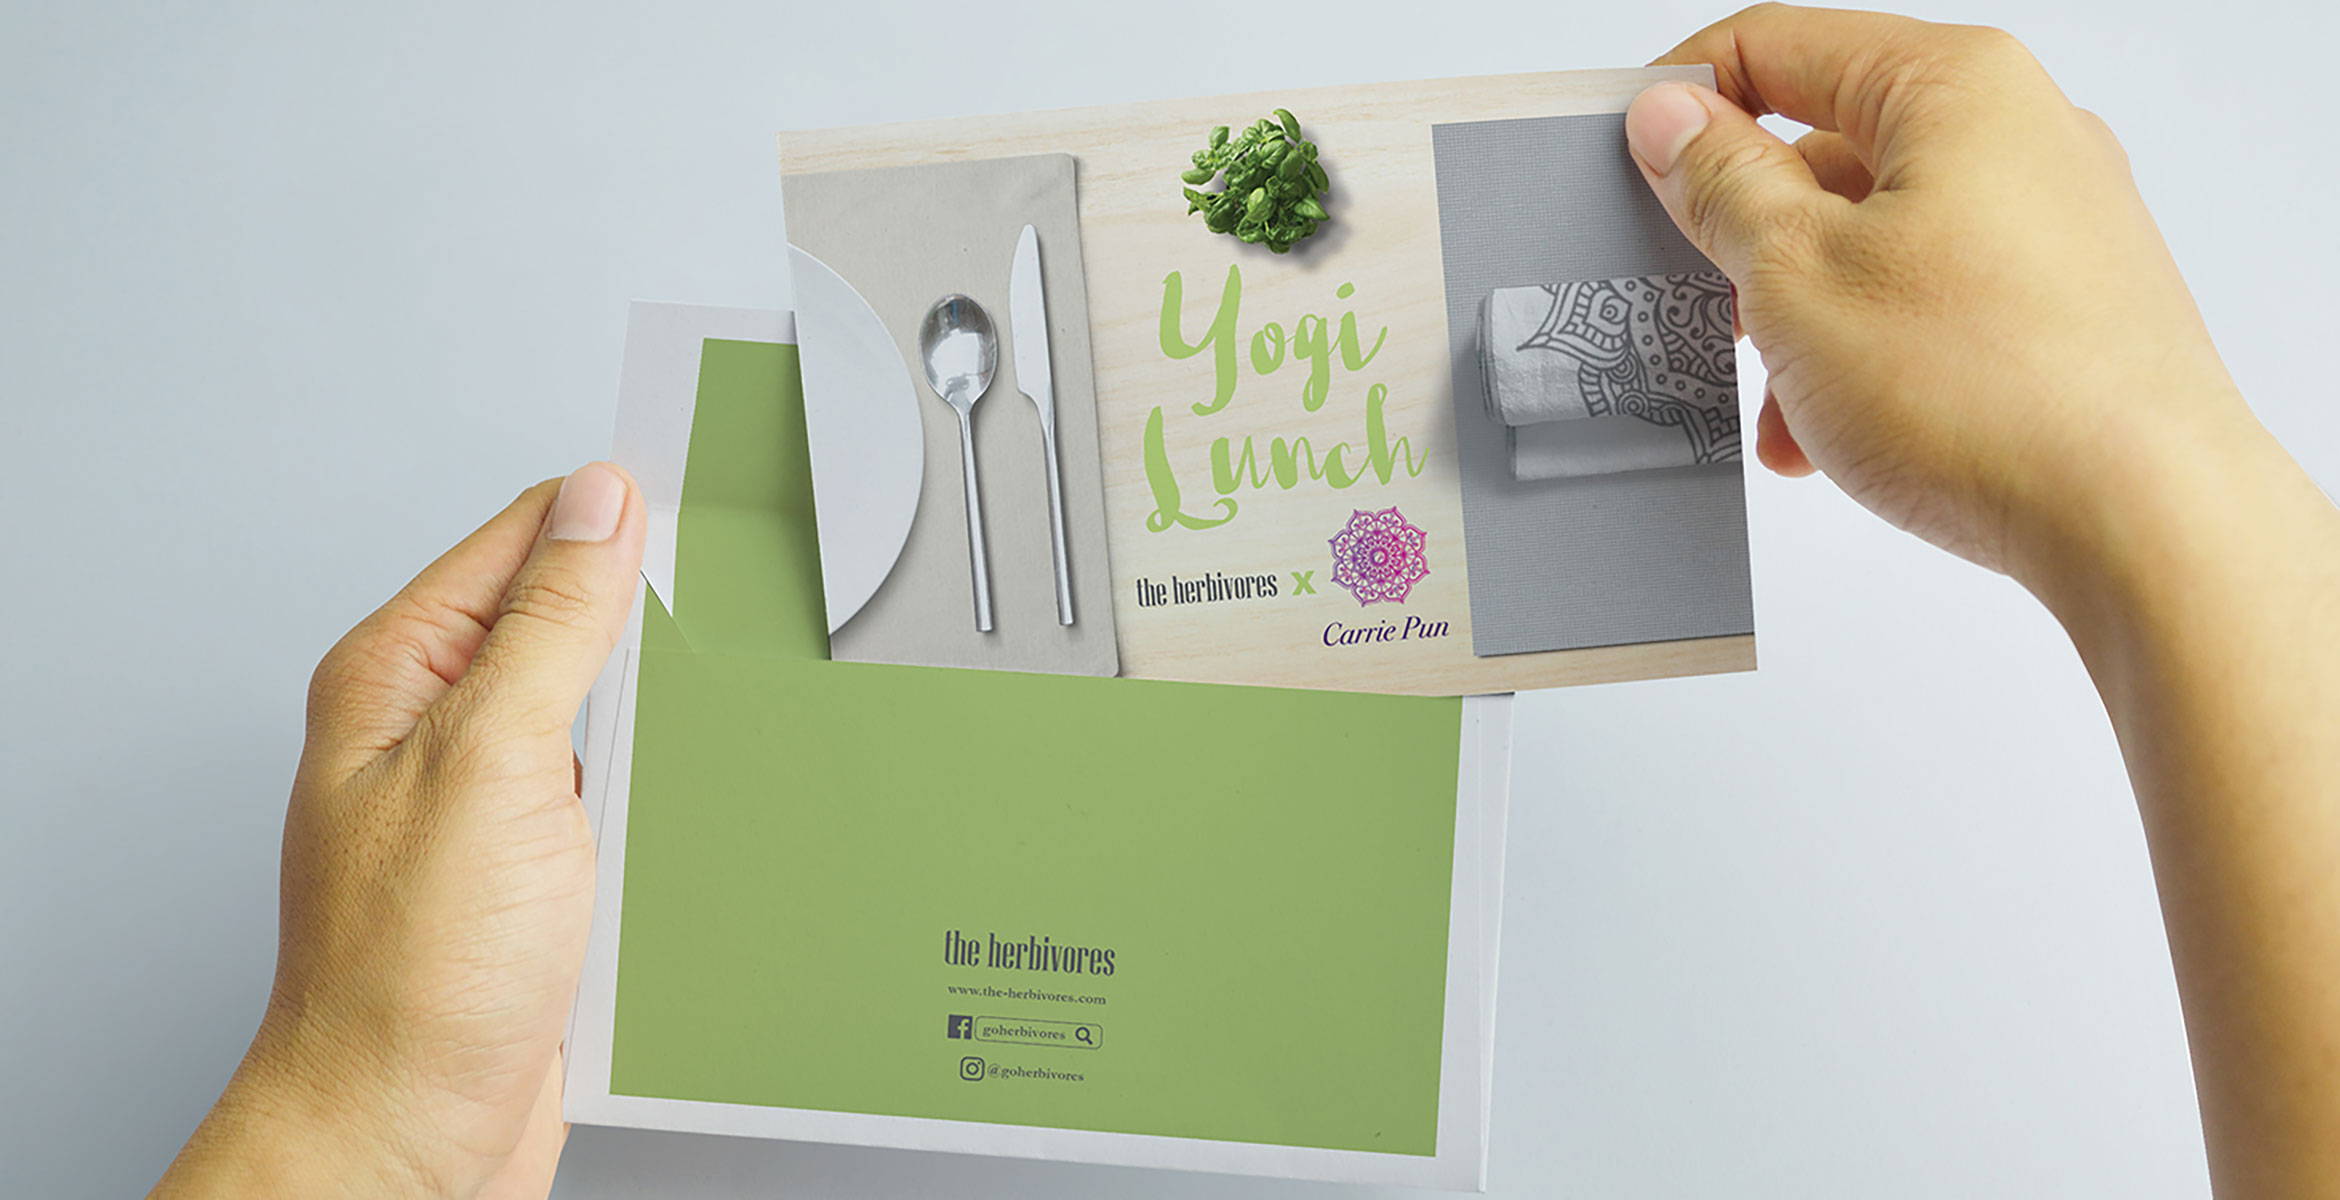 Direct mail design | Stand-alone design projects by Blank Sheet